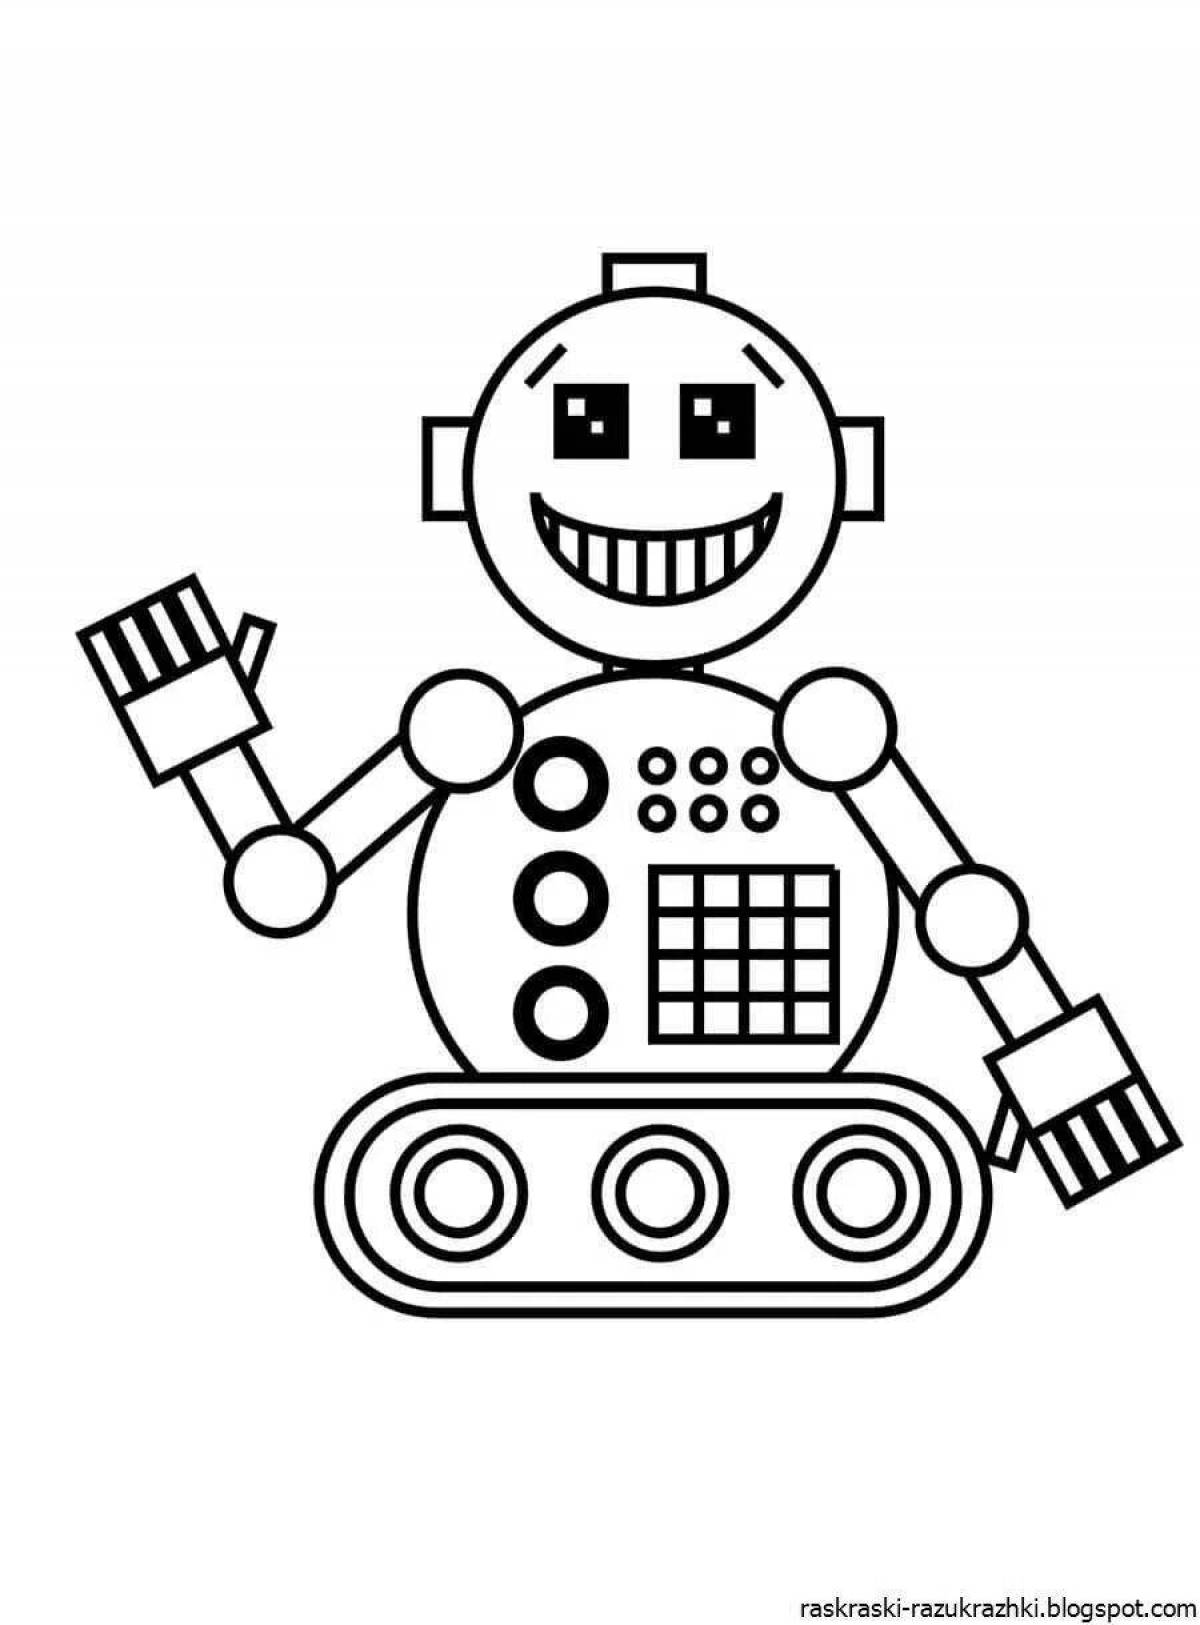 Fun coloring robots for 5-6 year old boys